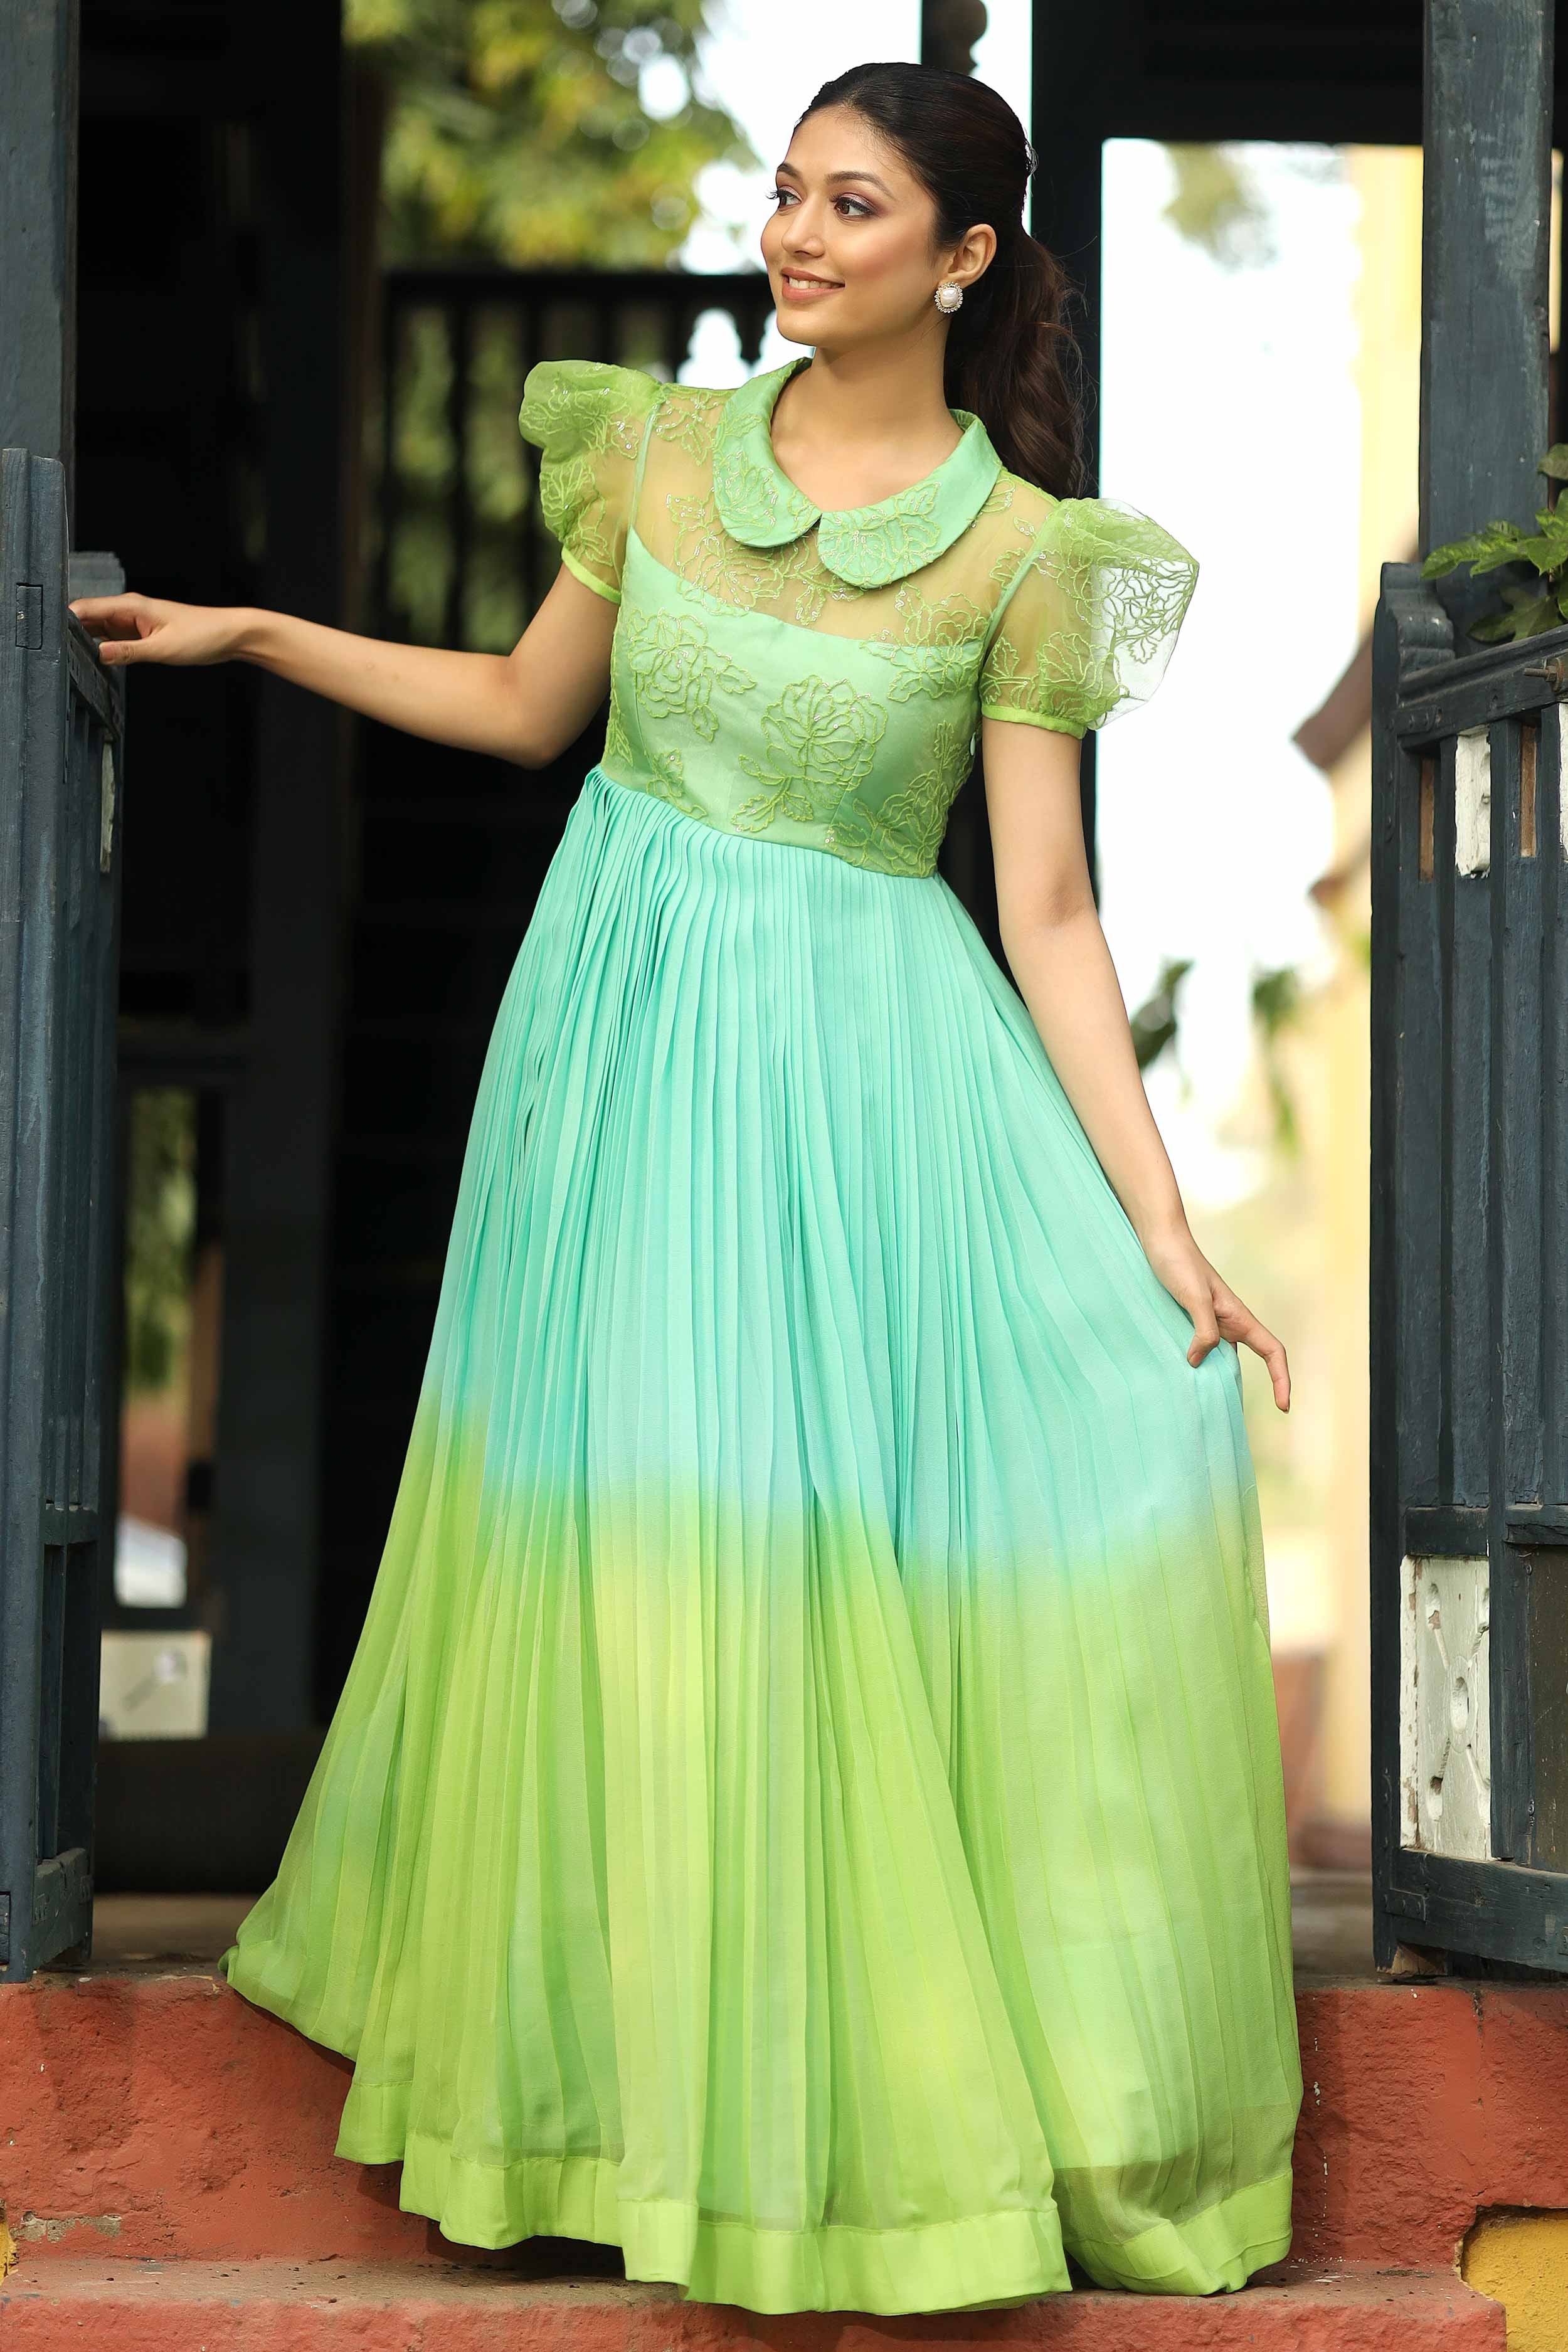 Suit Gowns - Buy Suit Gowns Online at Best Prices In India